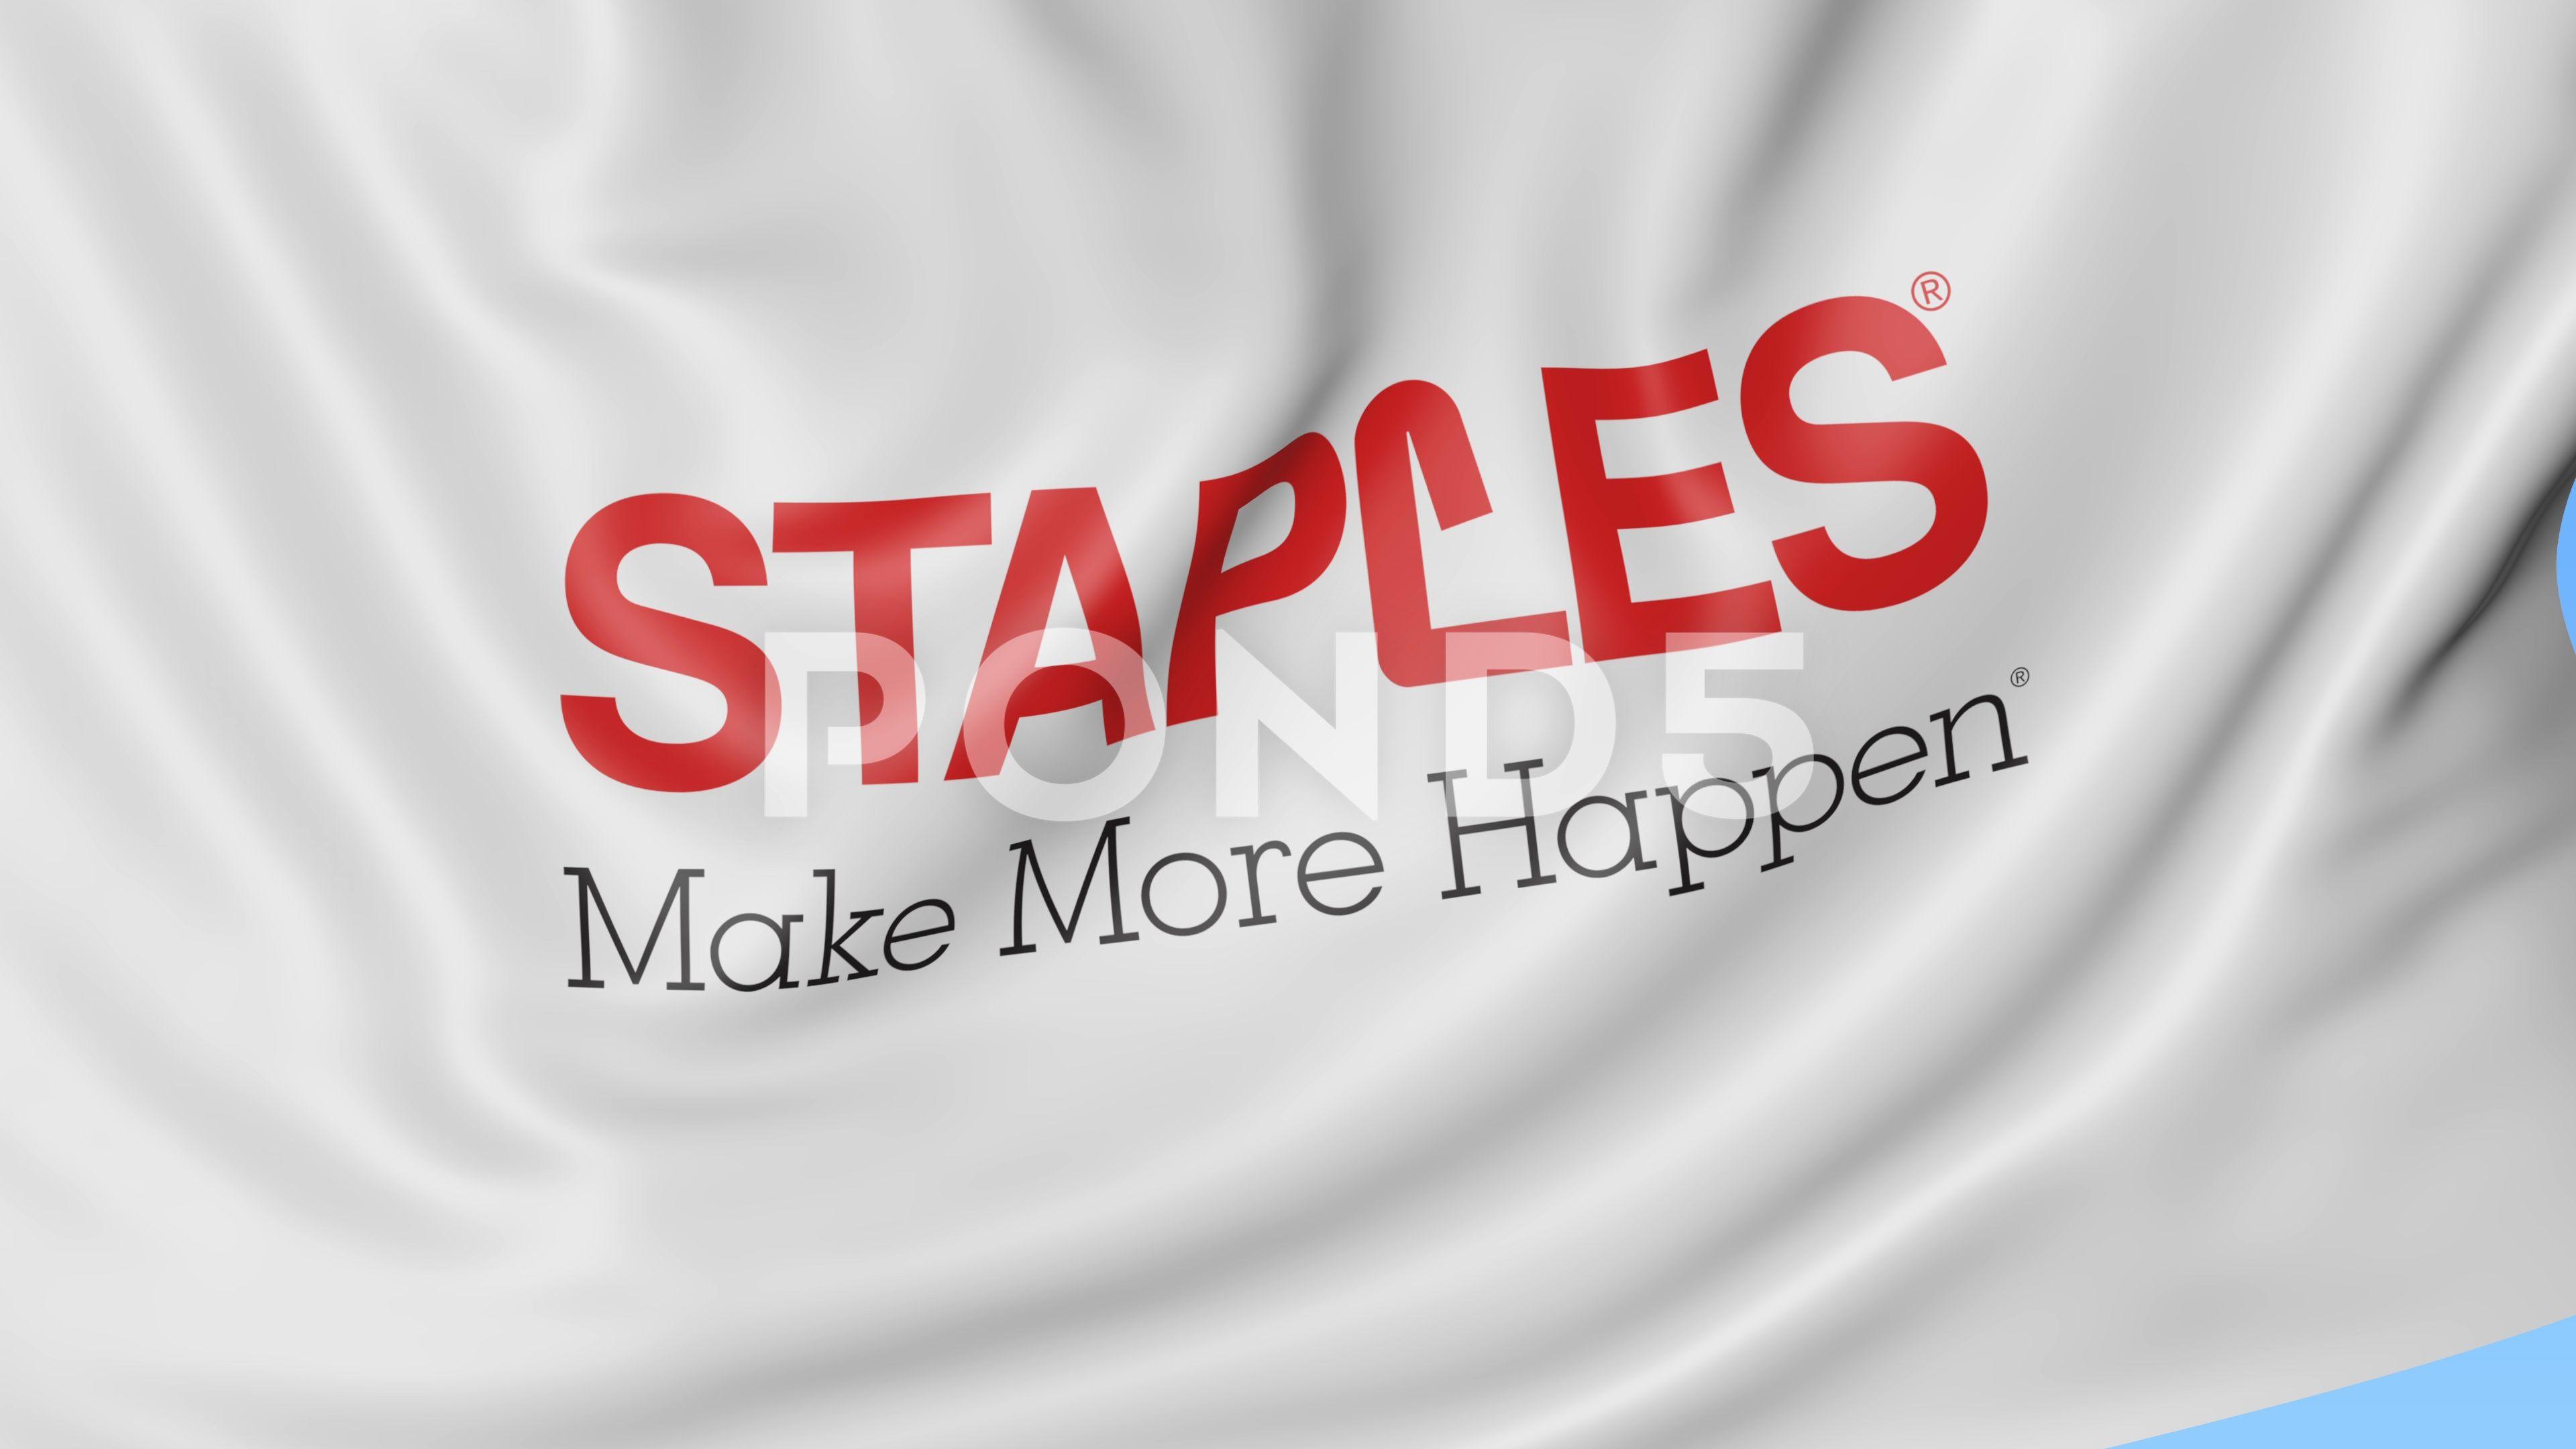 Make More Happen Staples Logo - Pictures of Staples Make More Happen Logo - kidskunst.info